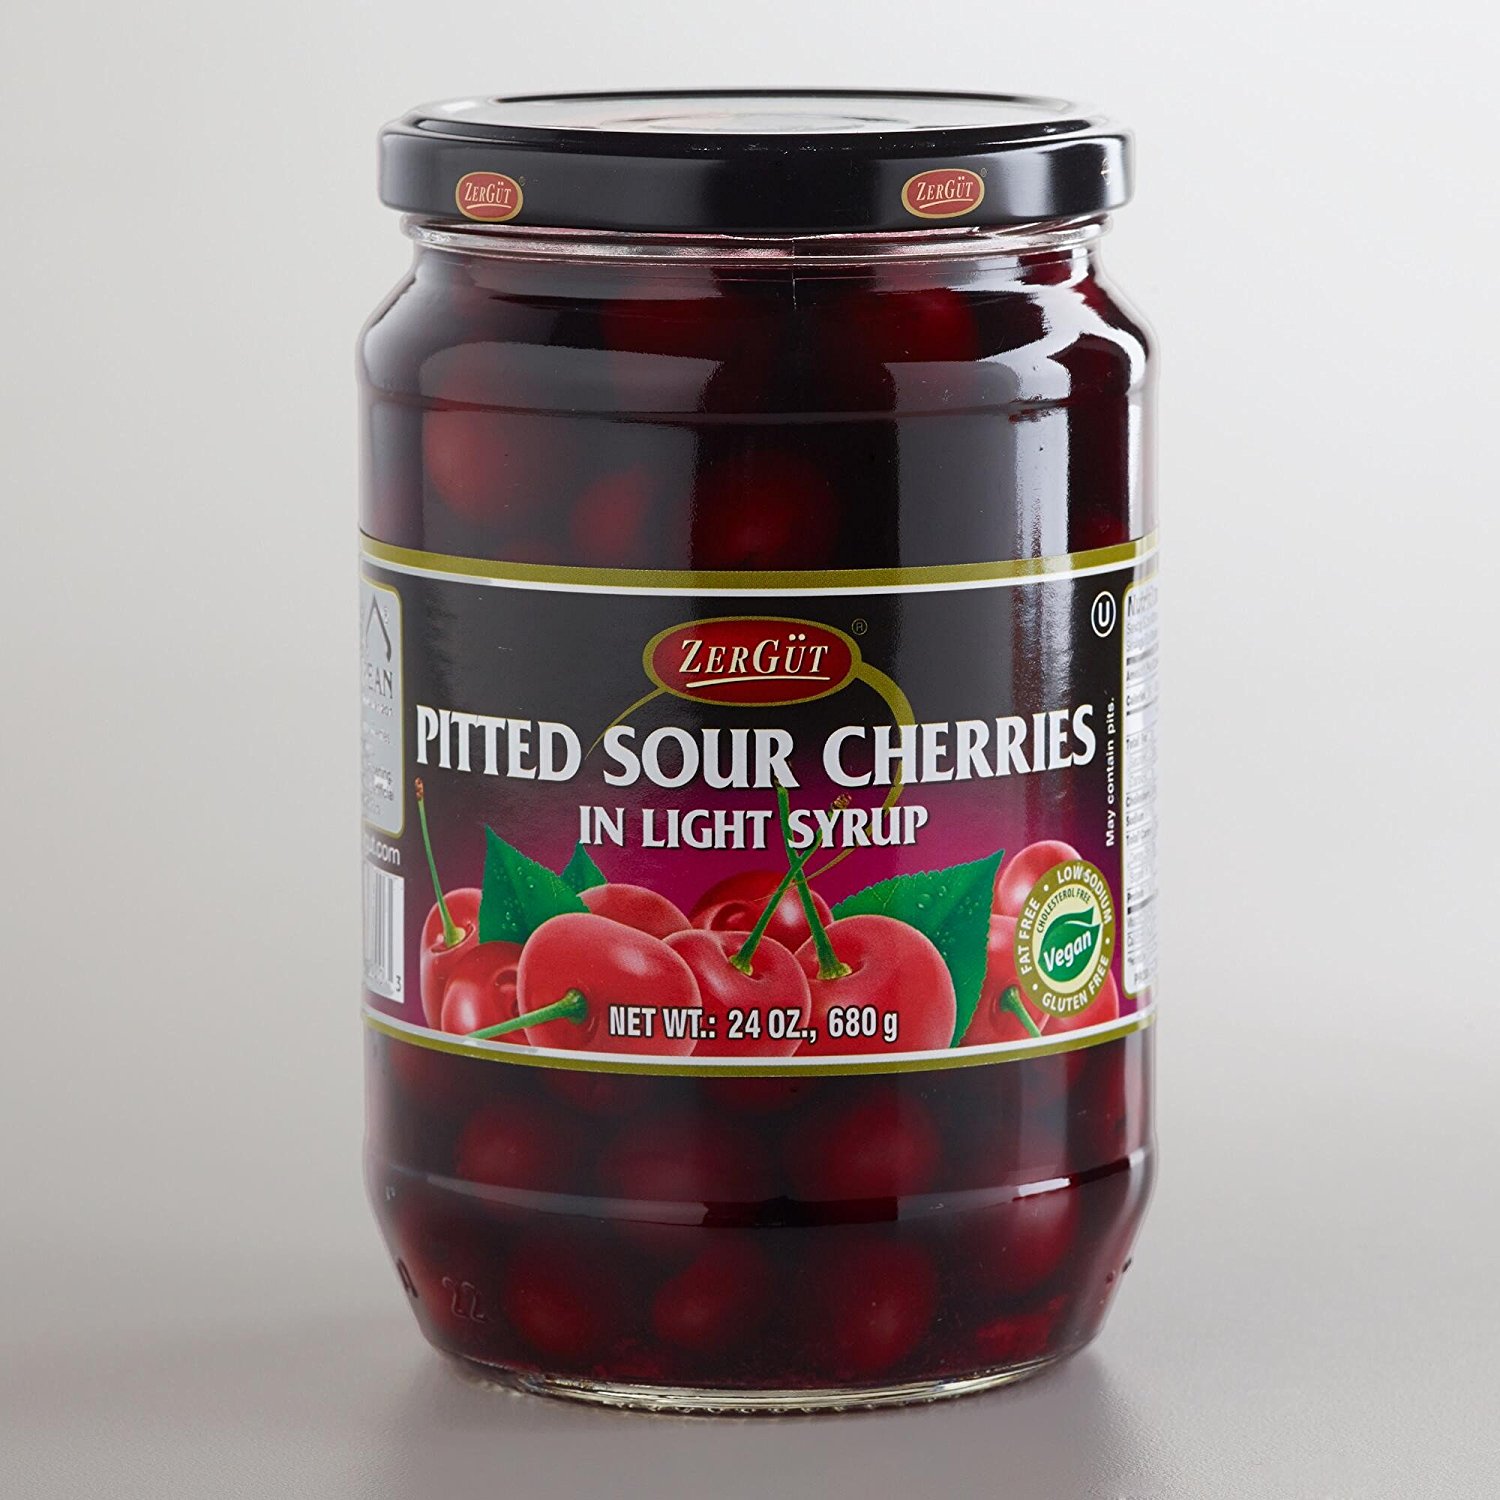 Amazon.com : Zergut Pitted Sour Cherries in Light Syrup 24 oz ...